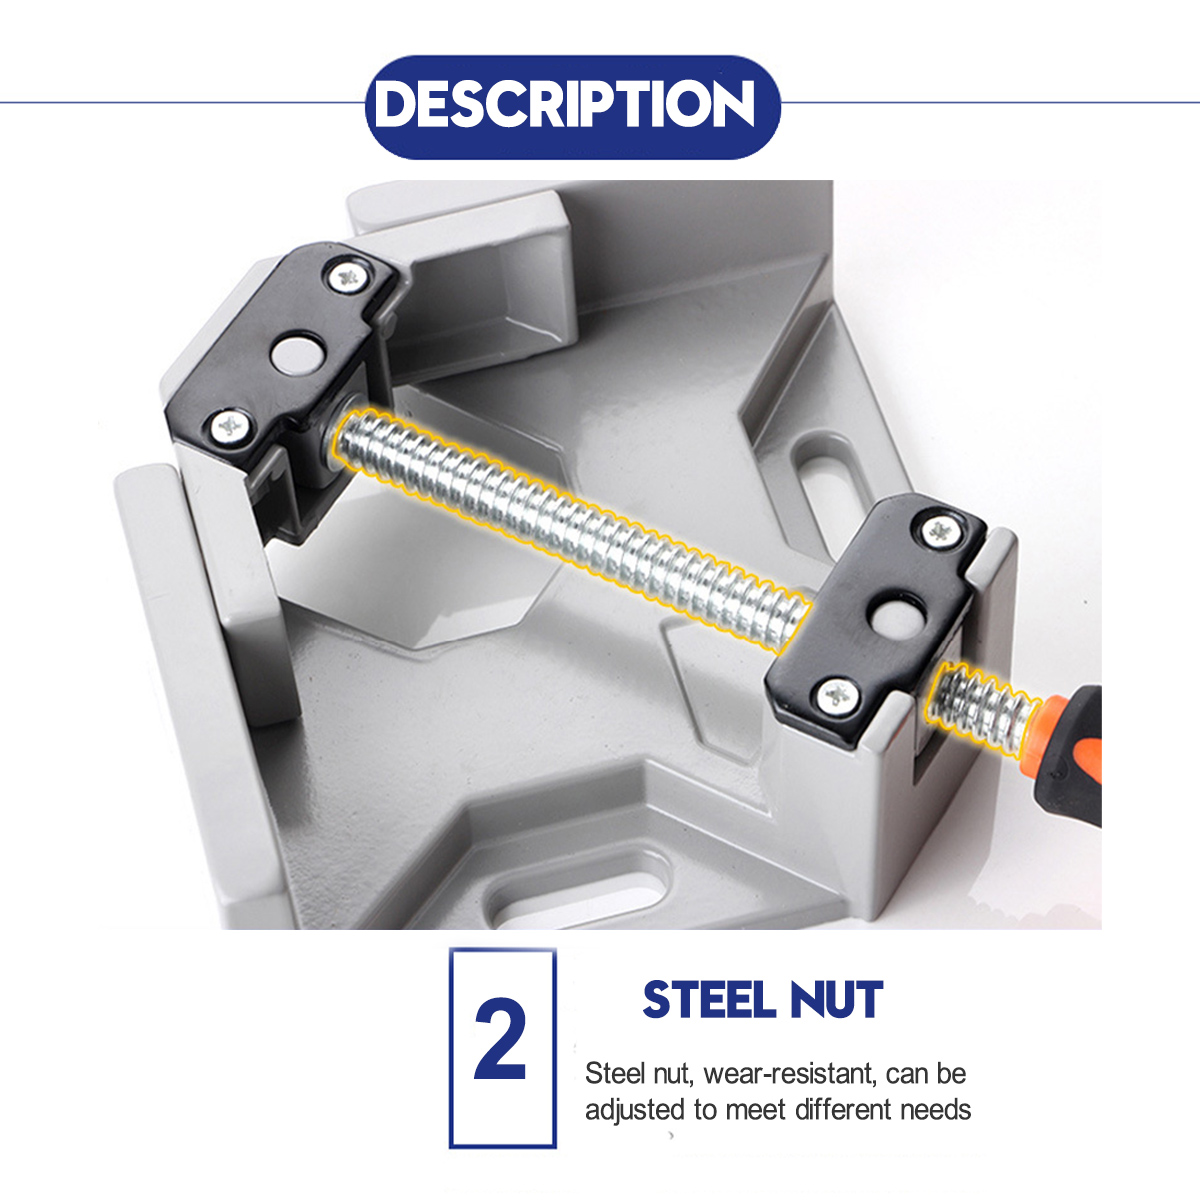 90-Degree-Quick-Release-Corner-Clamp-Right-Angle-Welding-Woodworking-Photo-Frame-Clamping-Tool-1768833-3